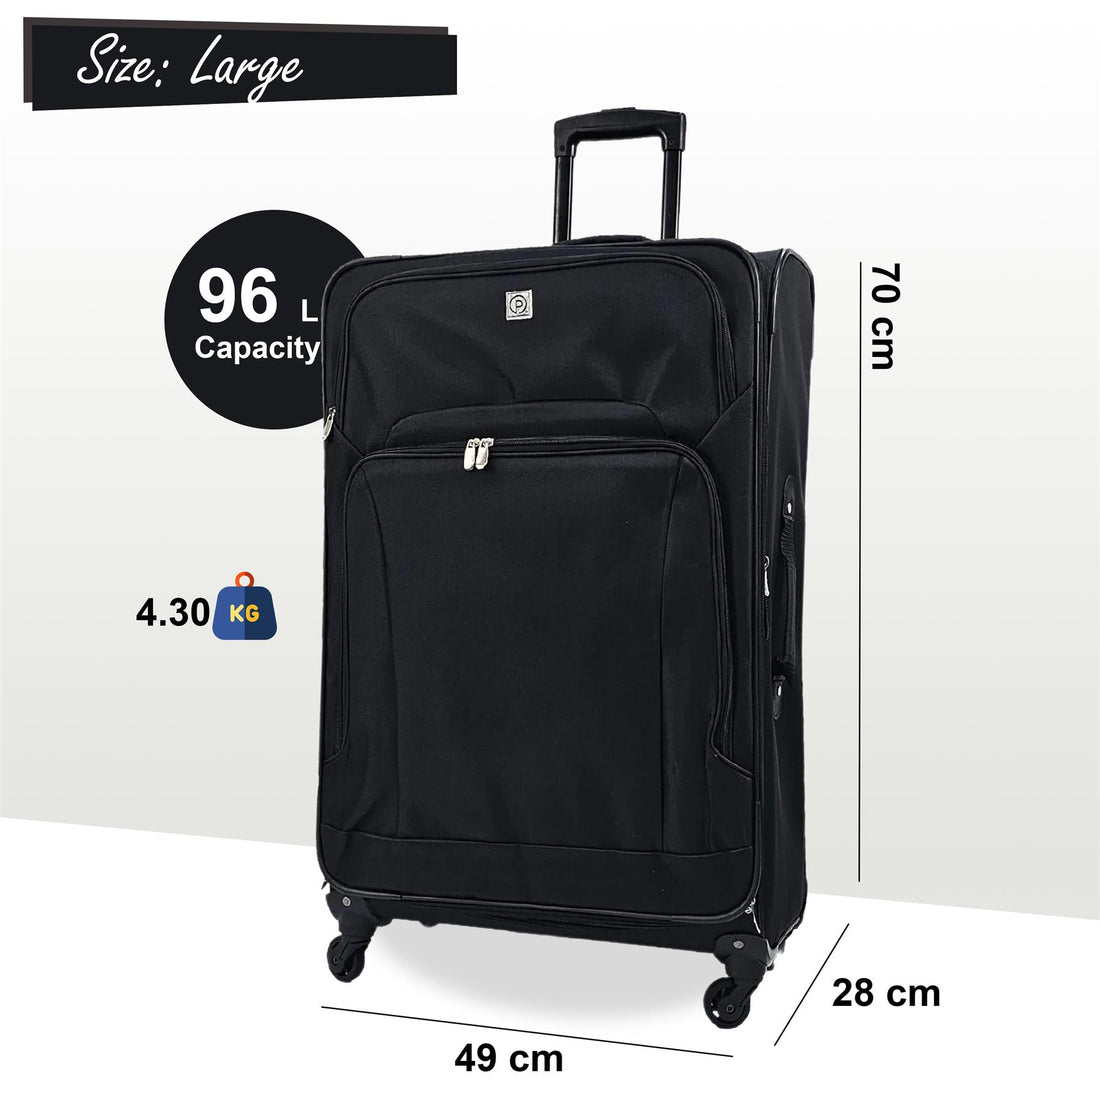 Coaling Large Soft Shell Suitcase in Black